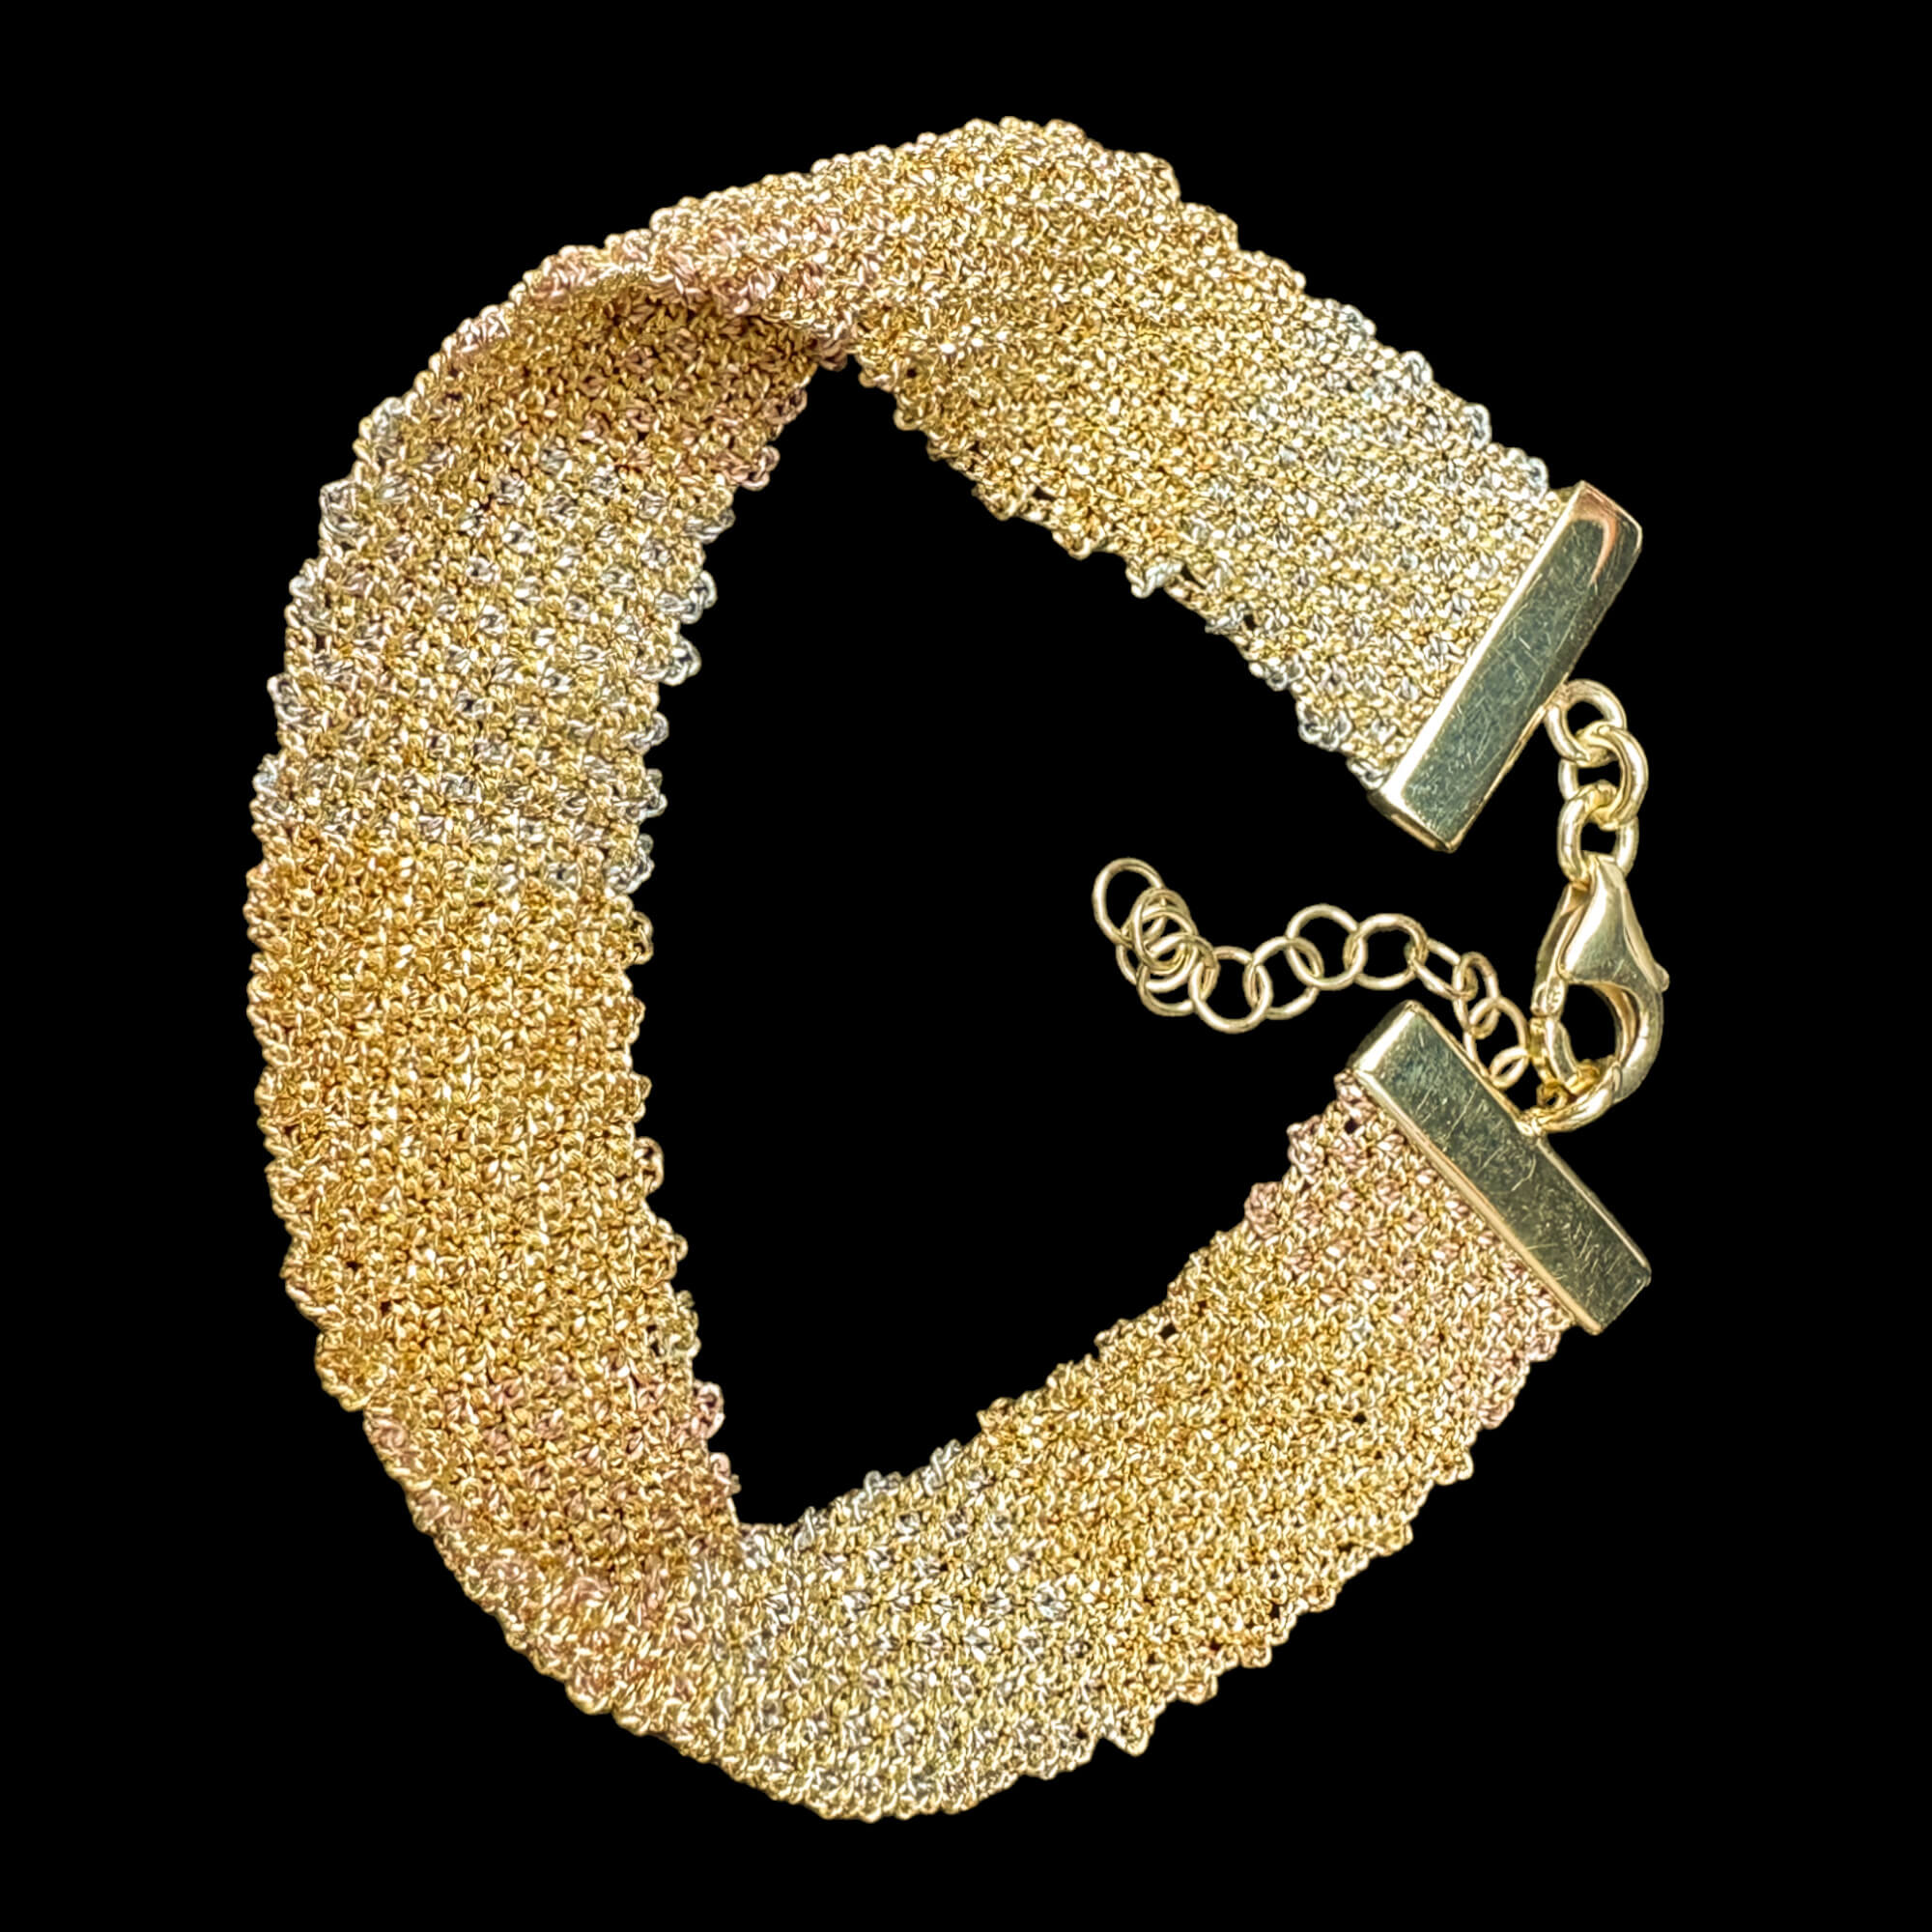 Tricolor gilded bracelet or interwoven chains